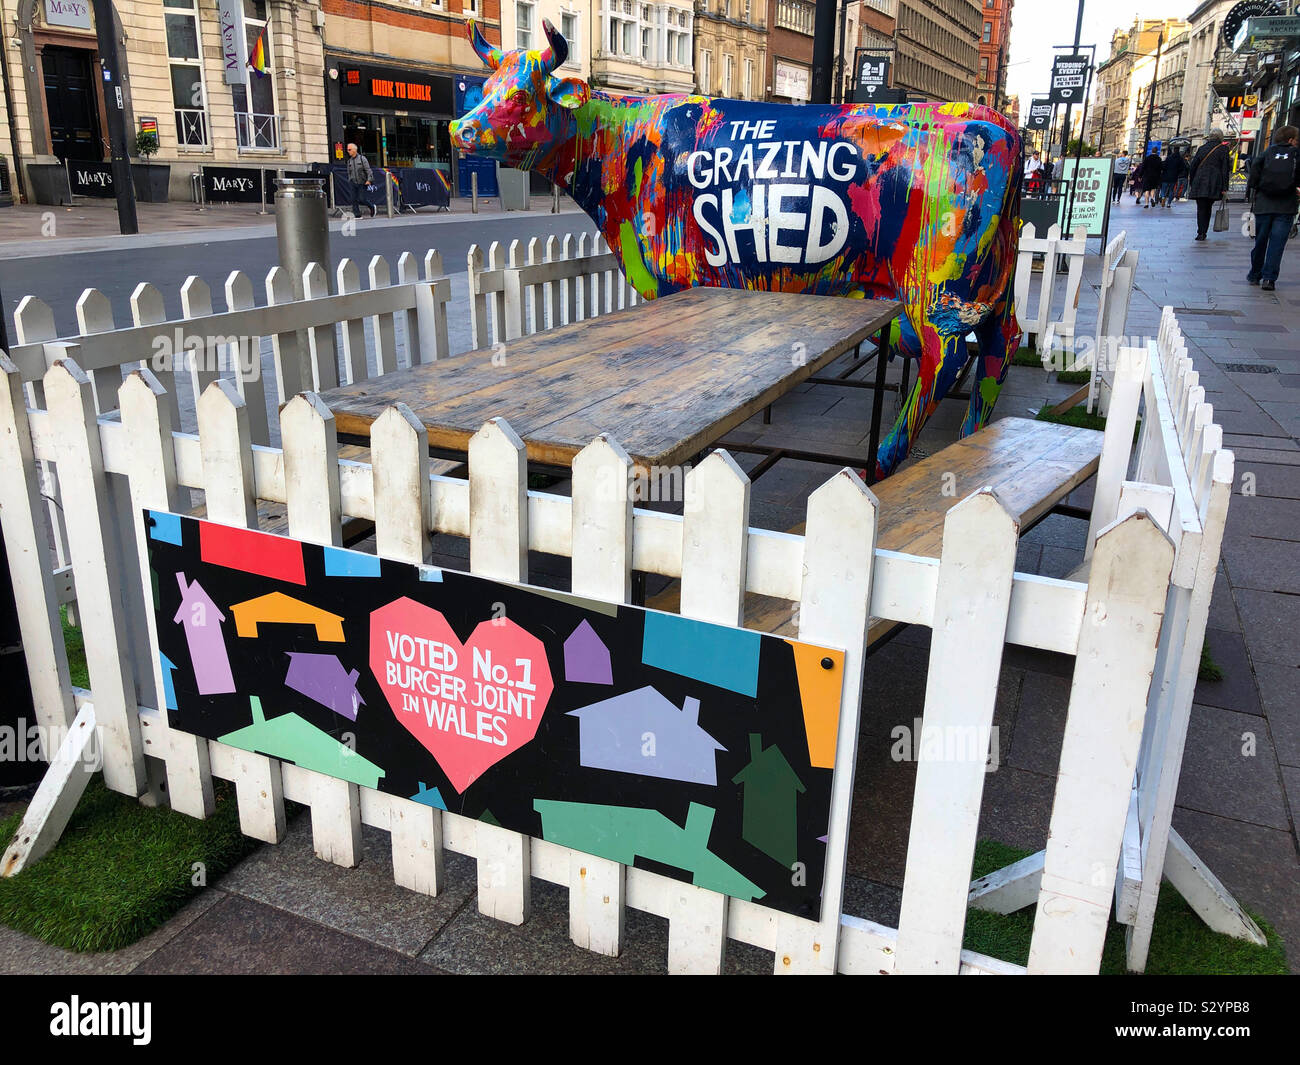 Cardiff, Wales, UK: 22 October 2019 - A painted cow advertises The Grazing Shed burger restaurant. Stock Photo